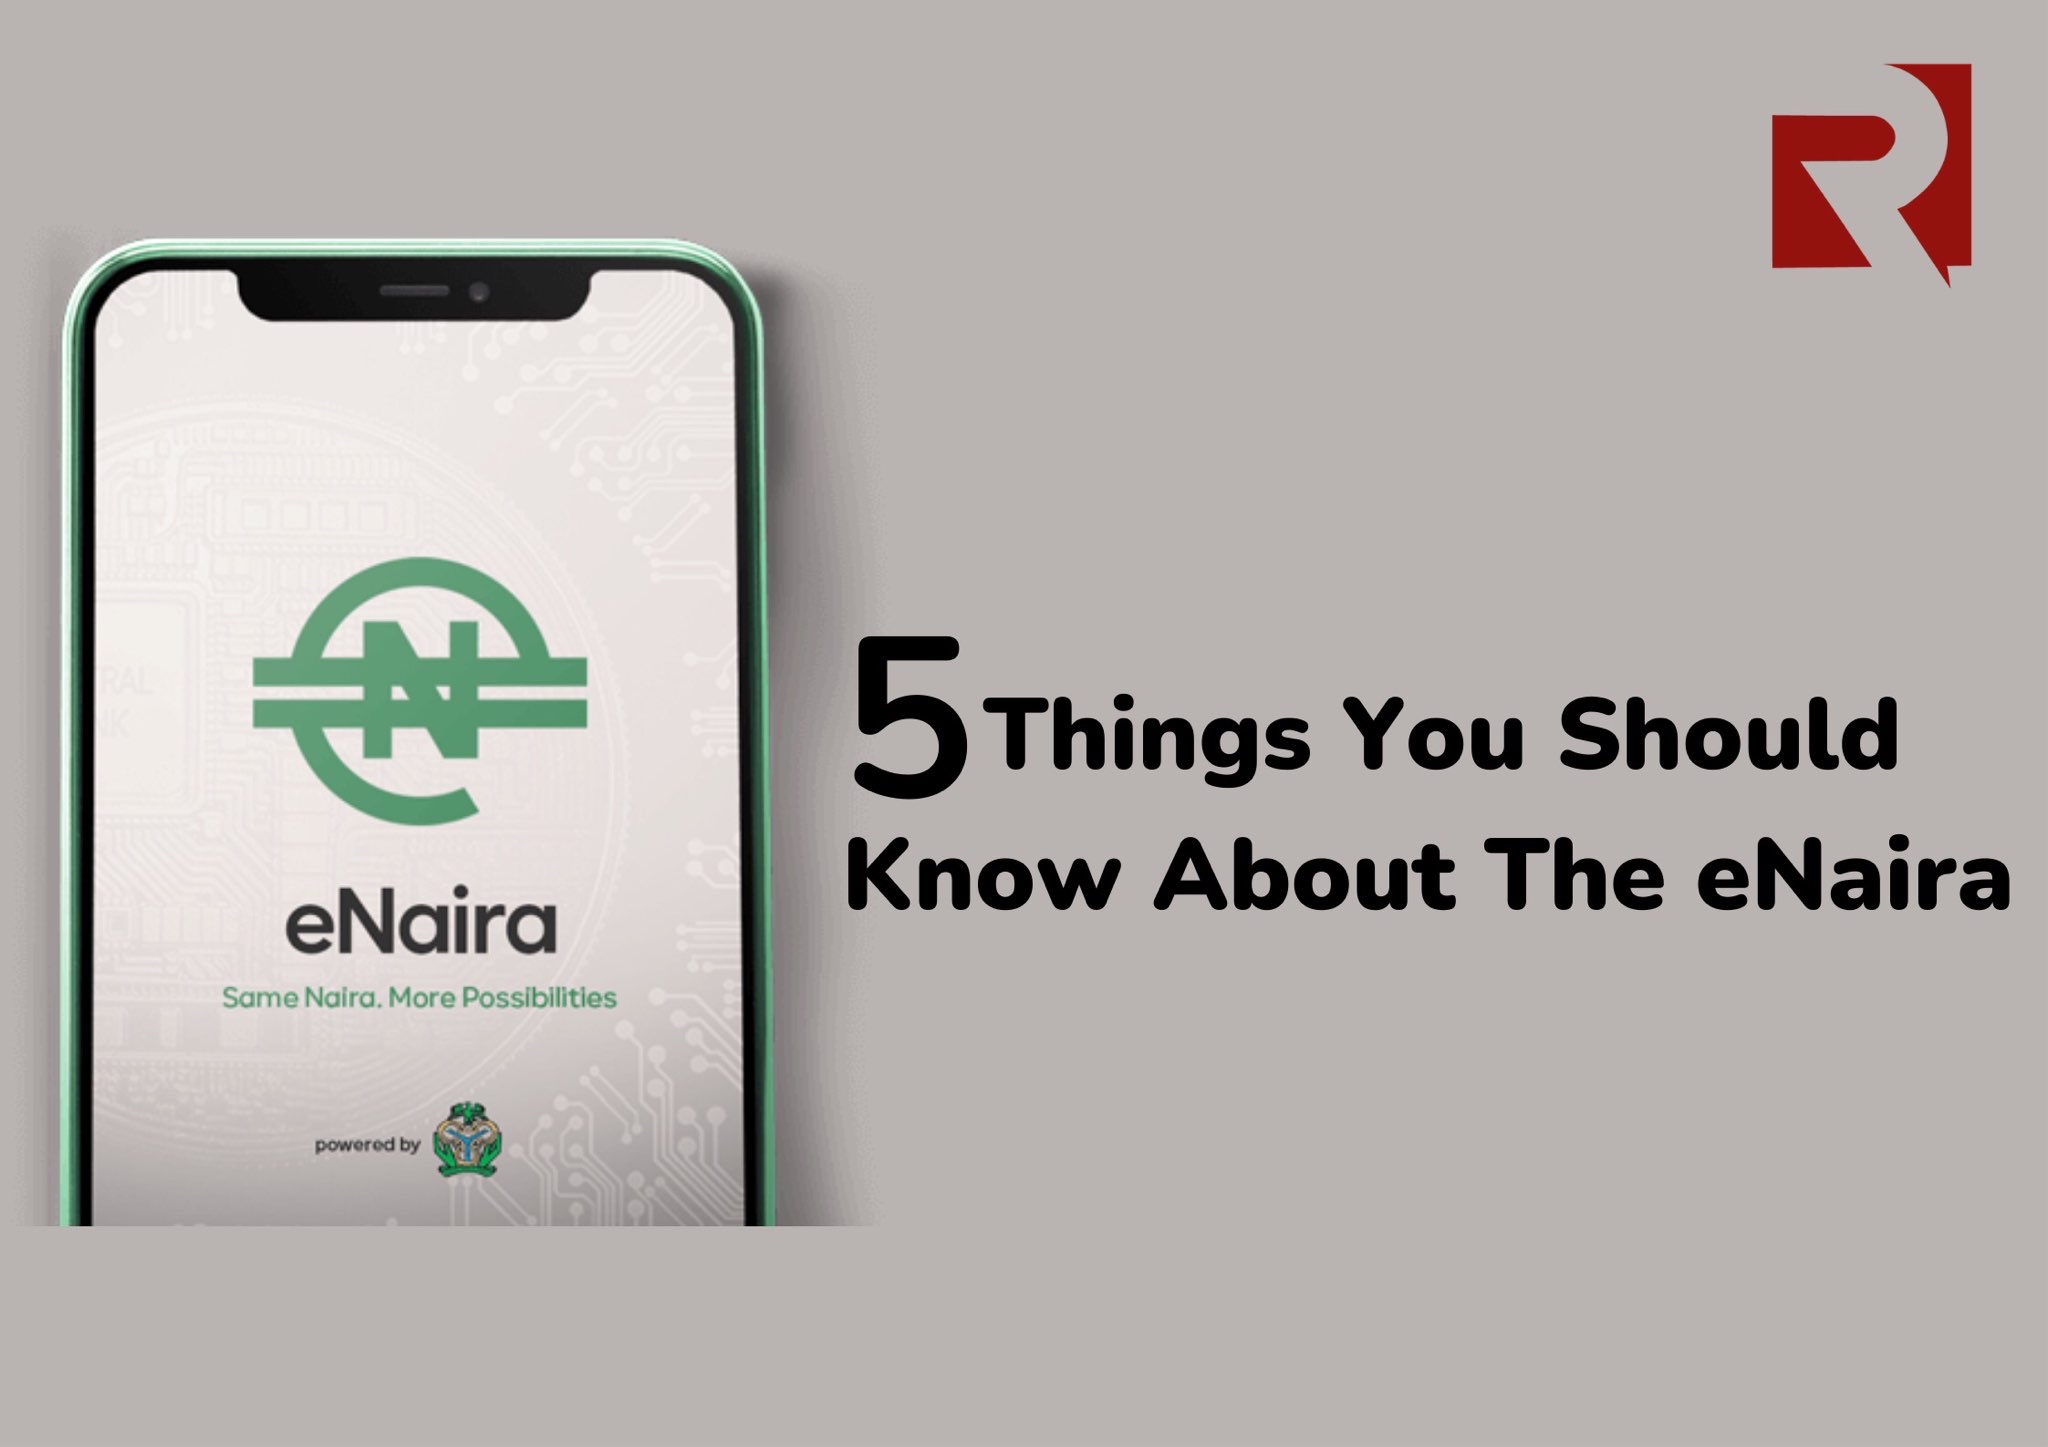 5 Things You Should Know About The eNaira